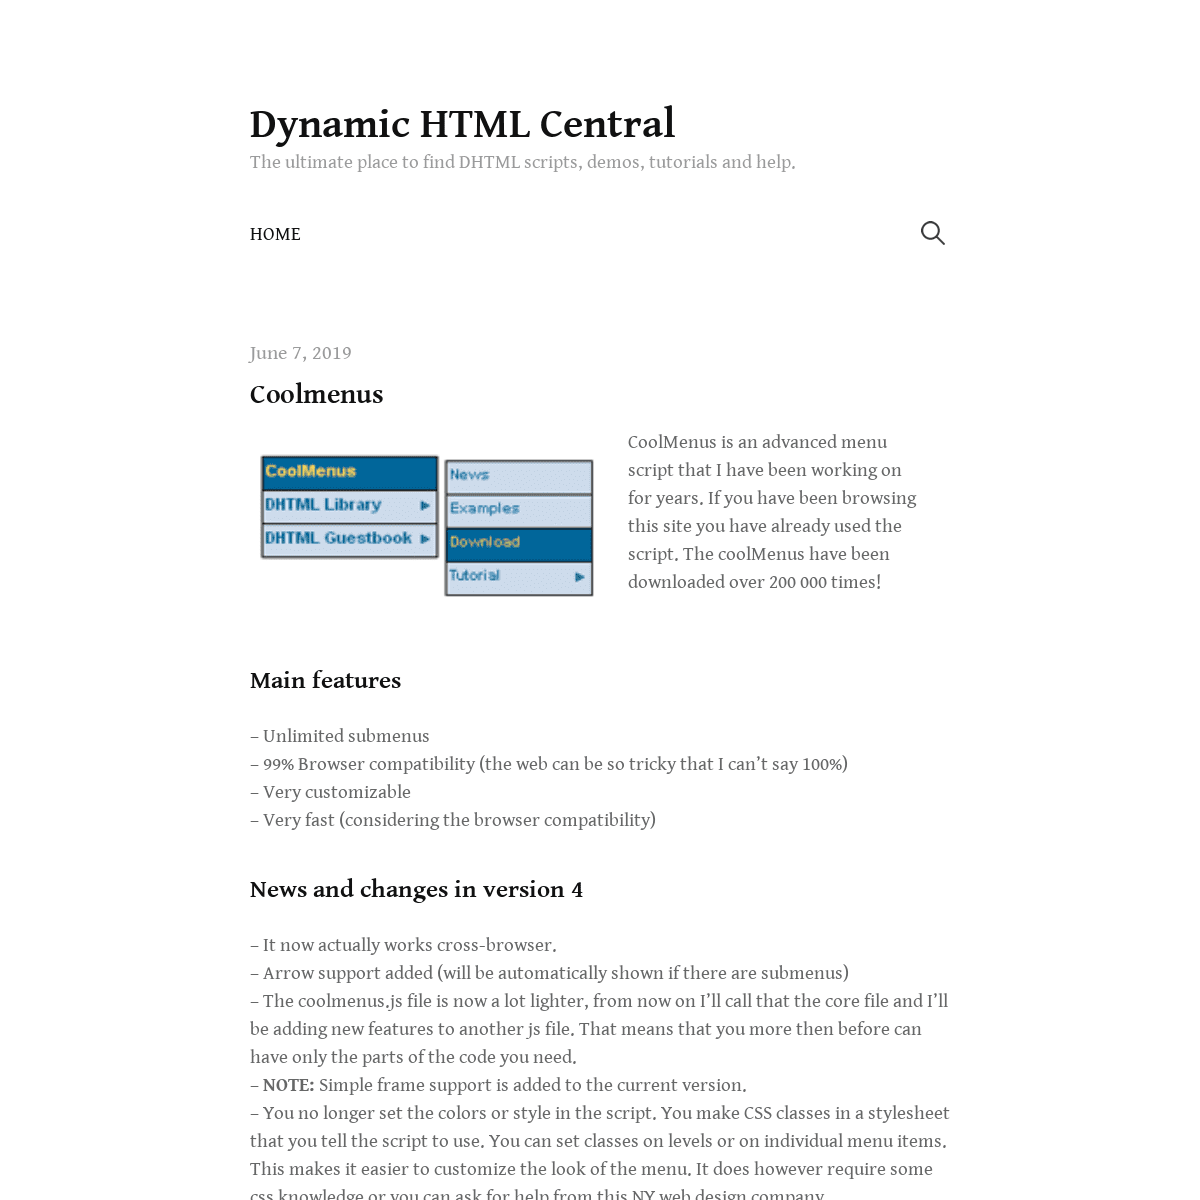 A complete backup of https://dhtmlcentral.com